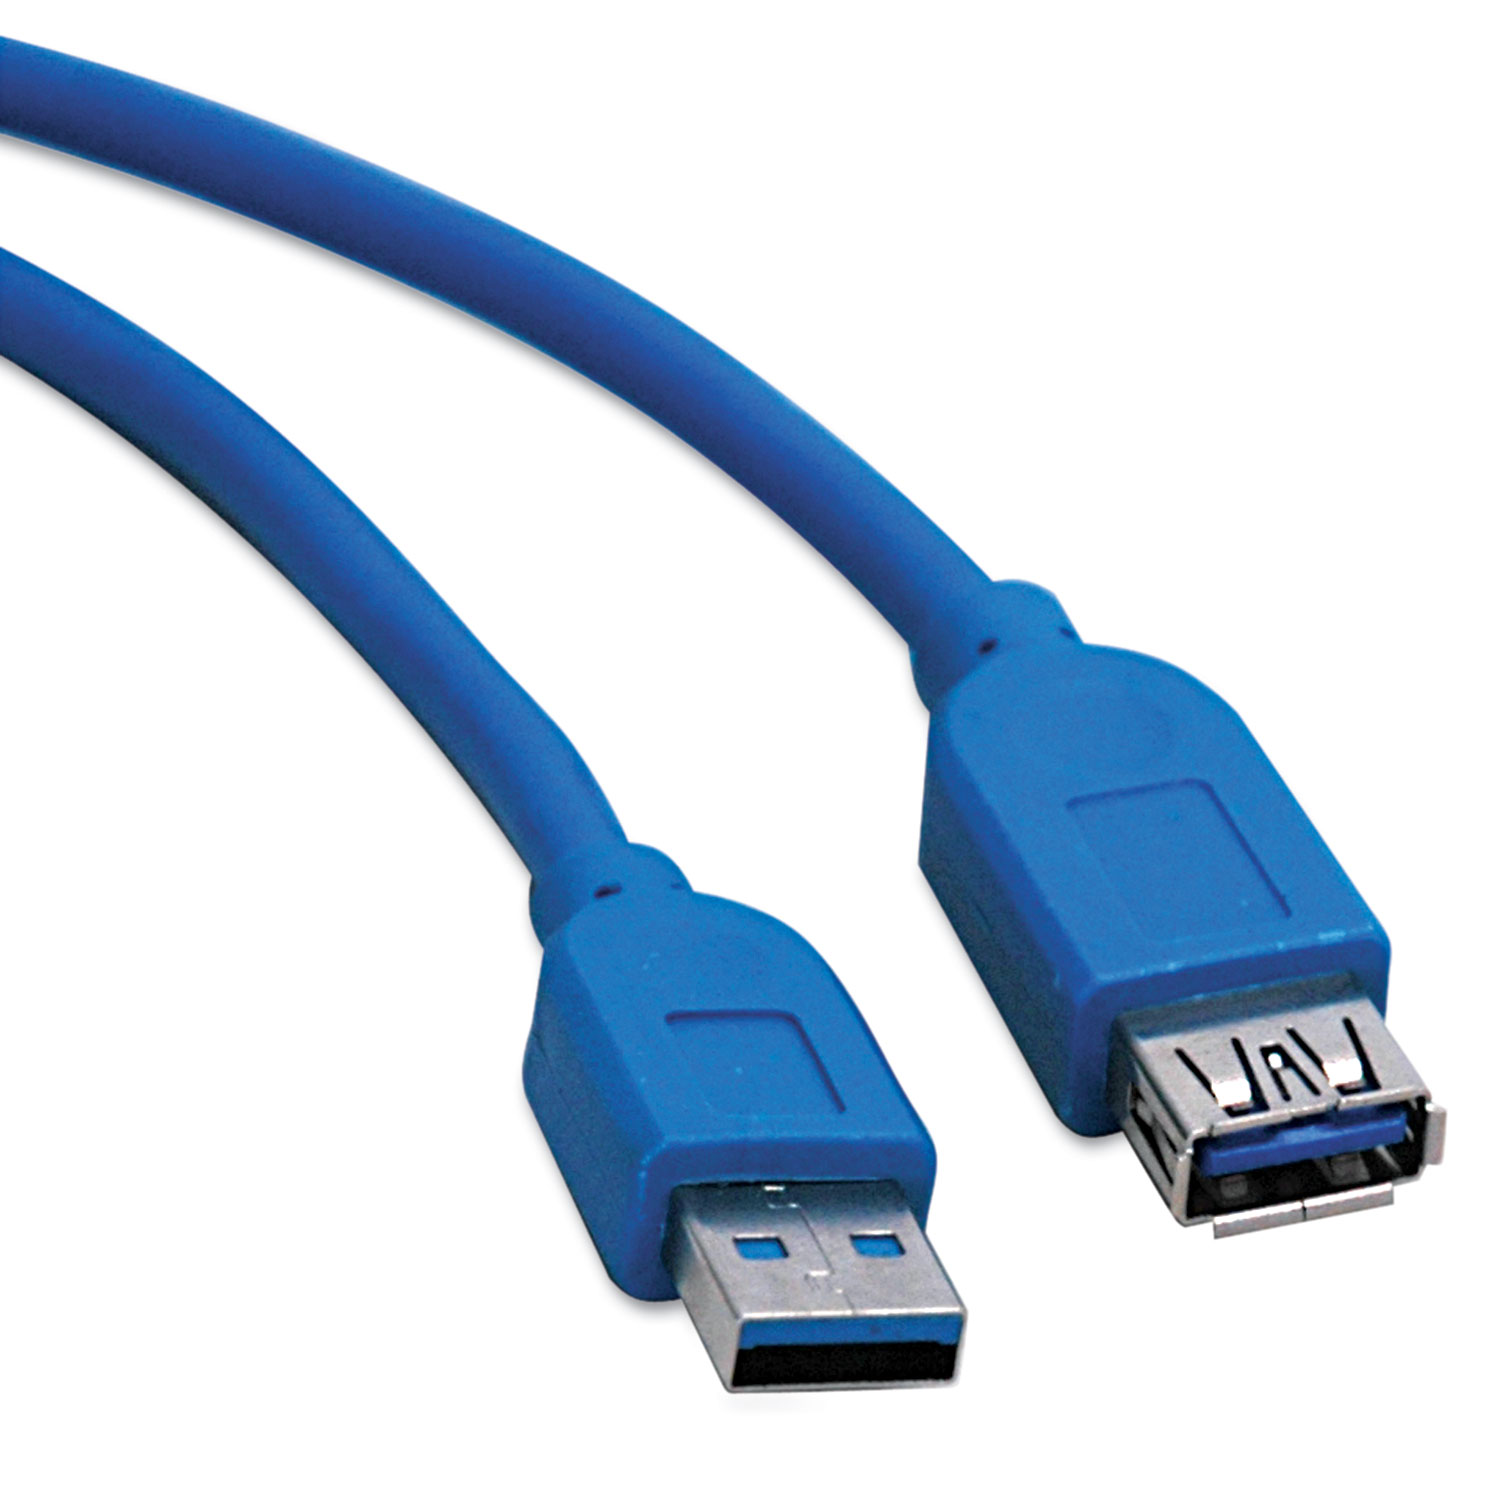 USB 3.0 Extension Cable, 10 ft, Blue